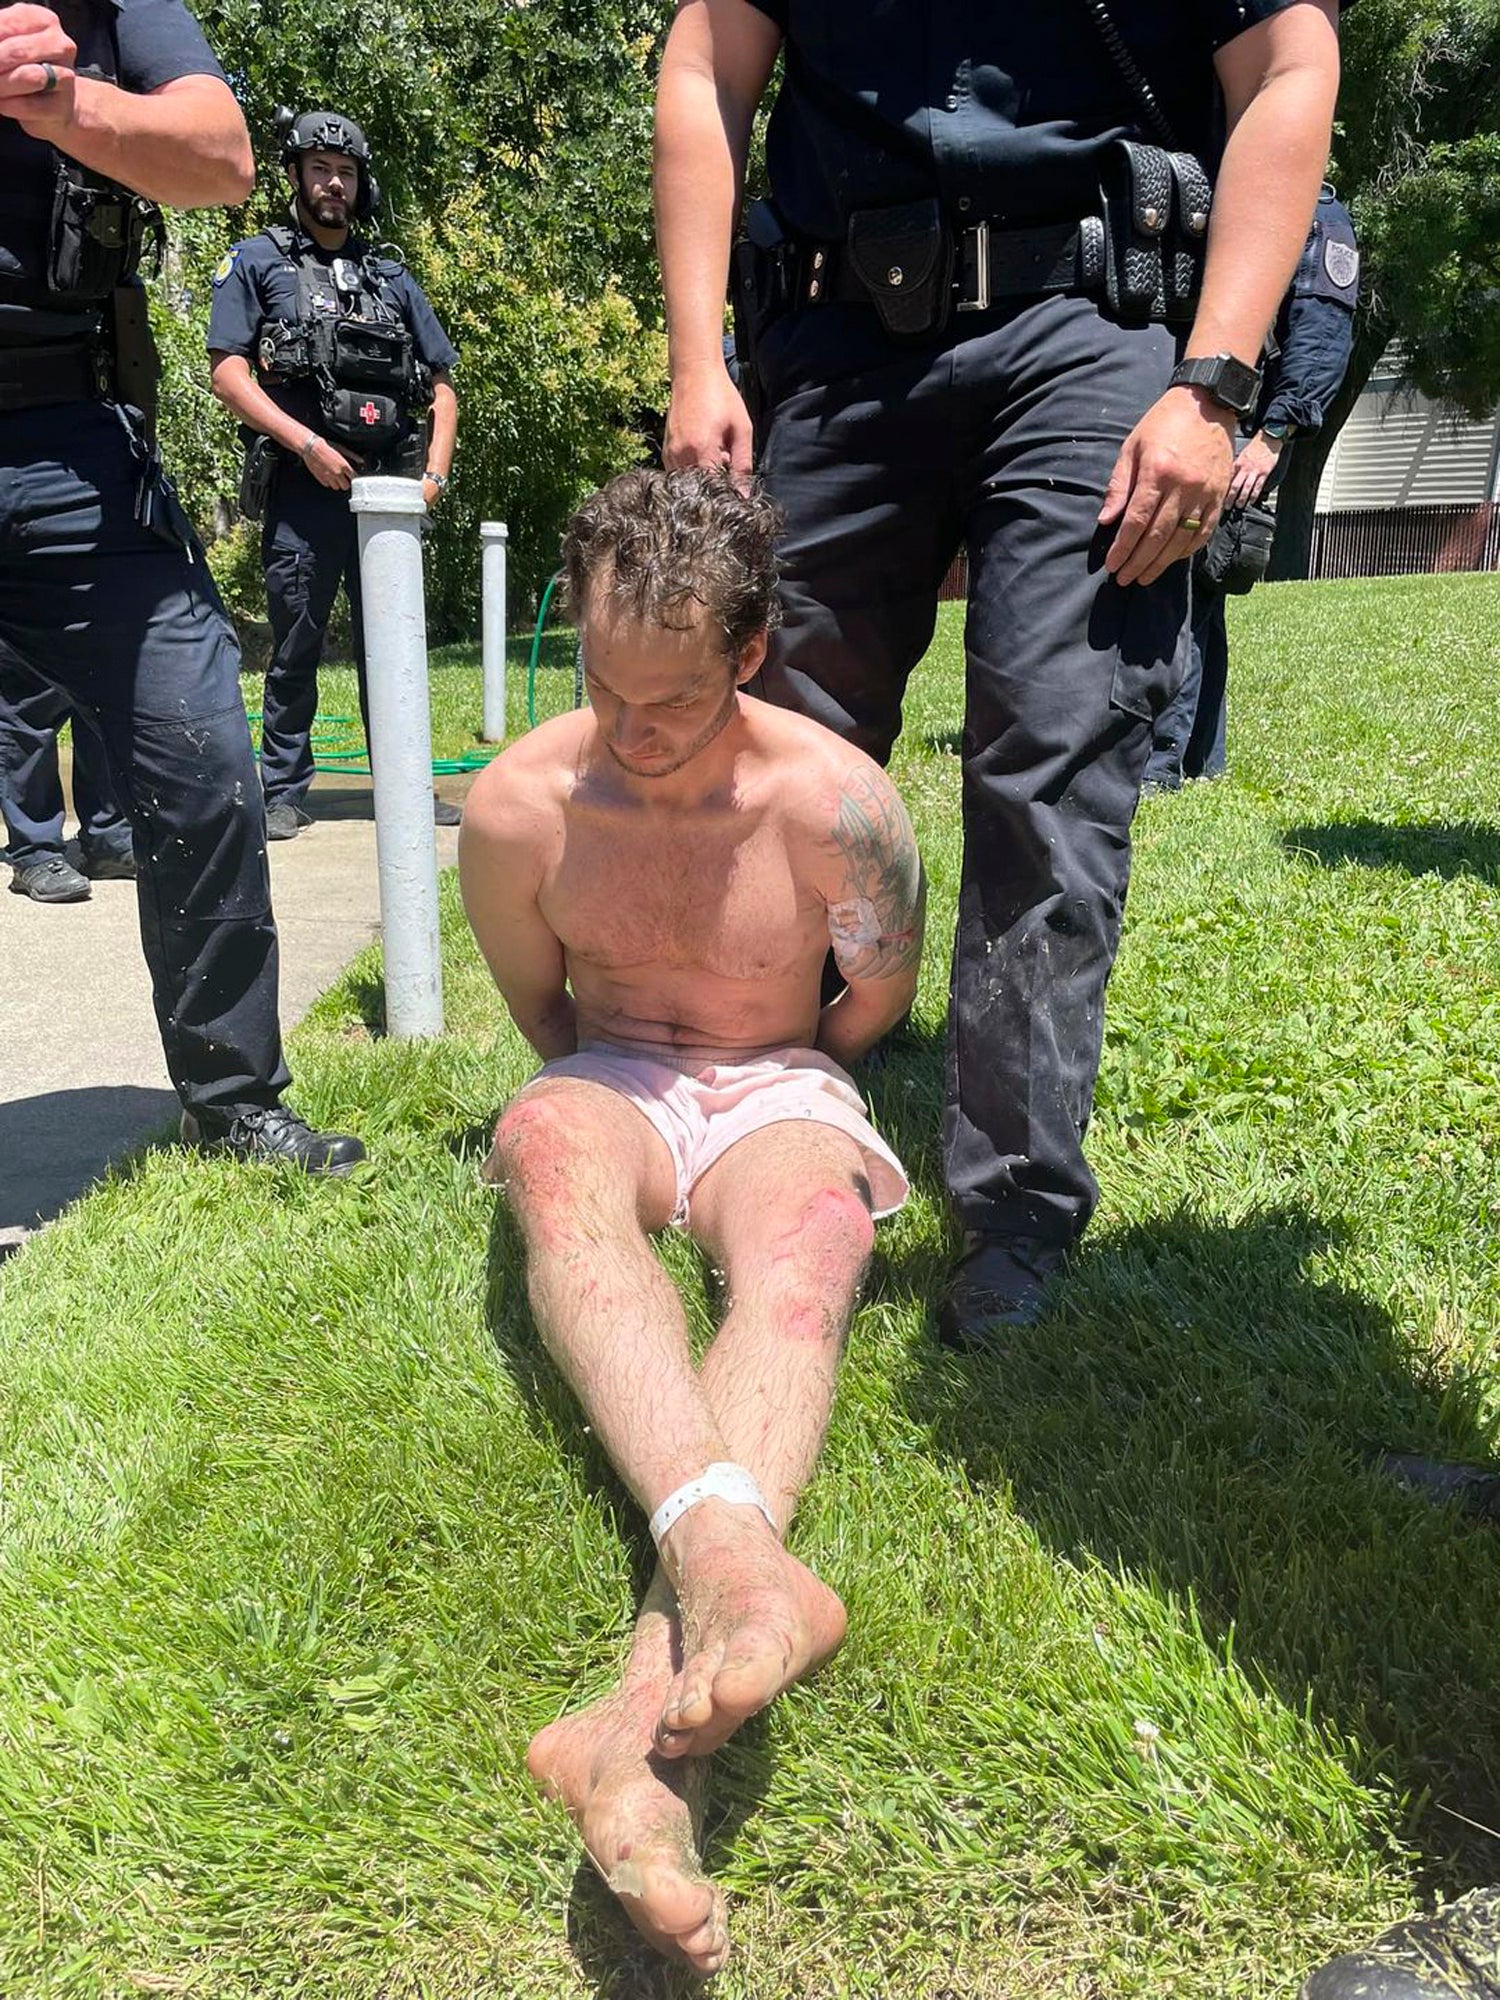 Fugitive Eric Abril sits after being taken into custody by police in Rocklin